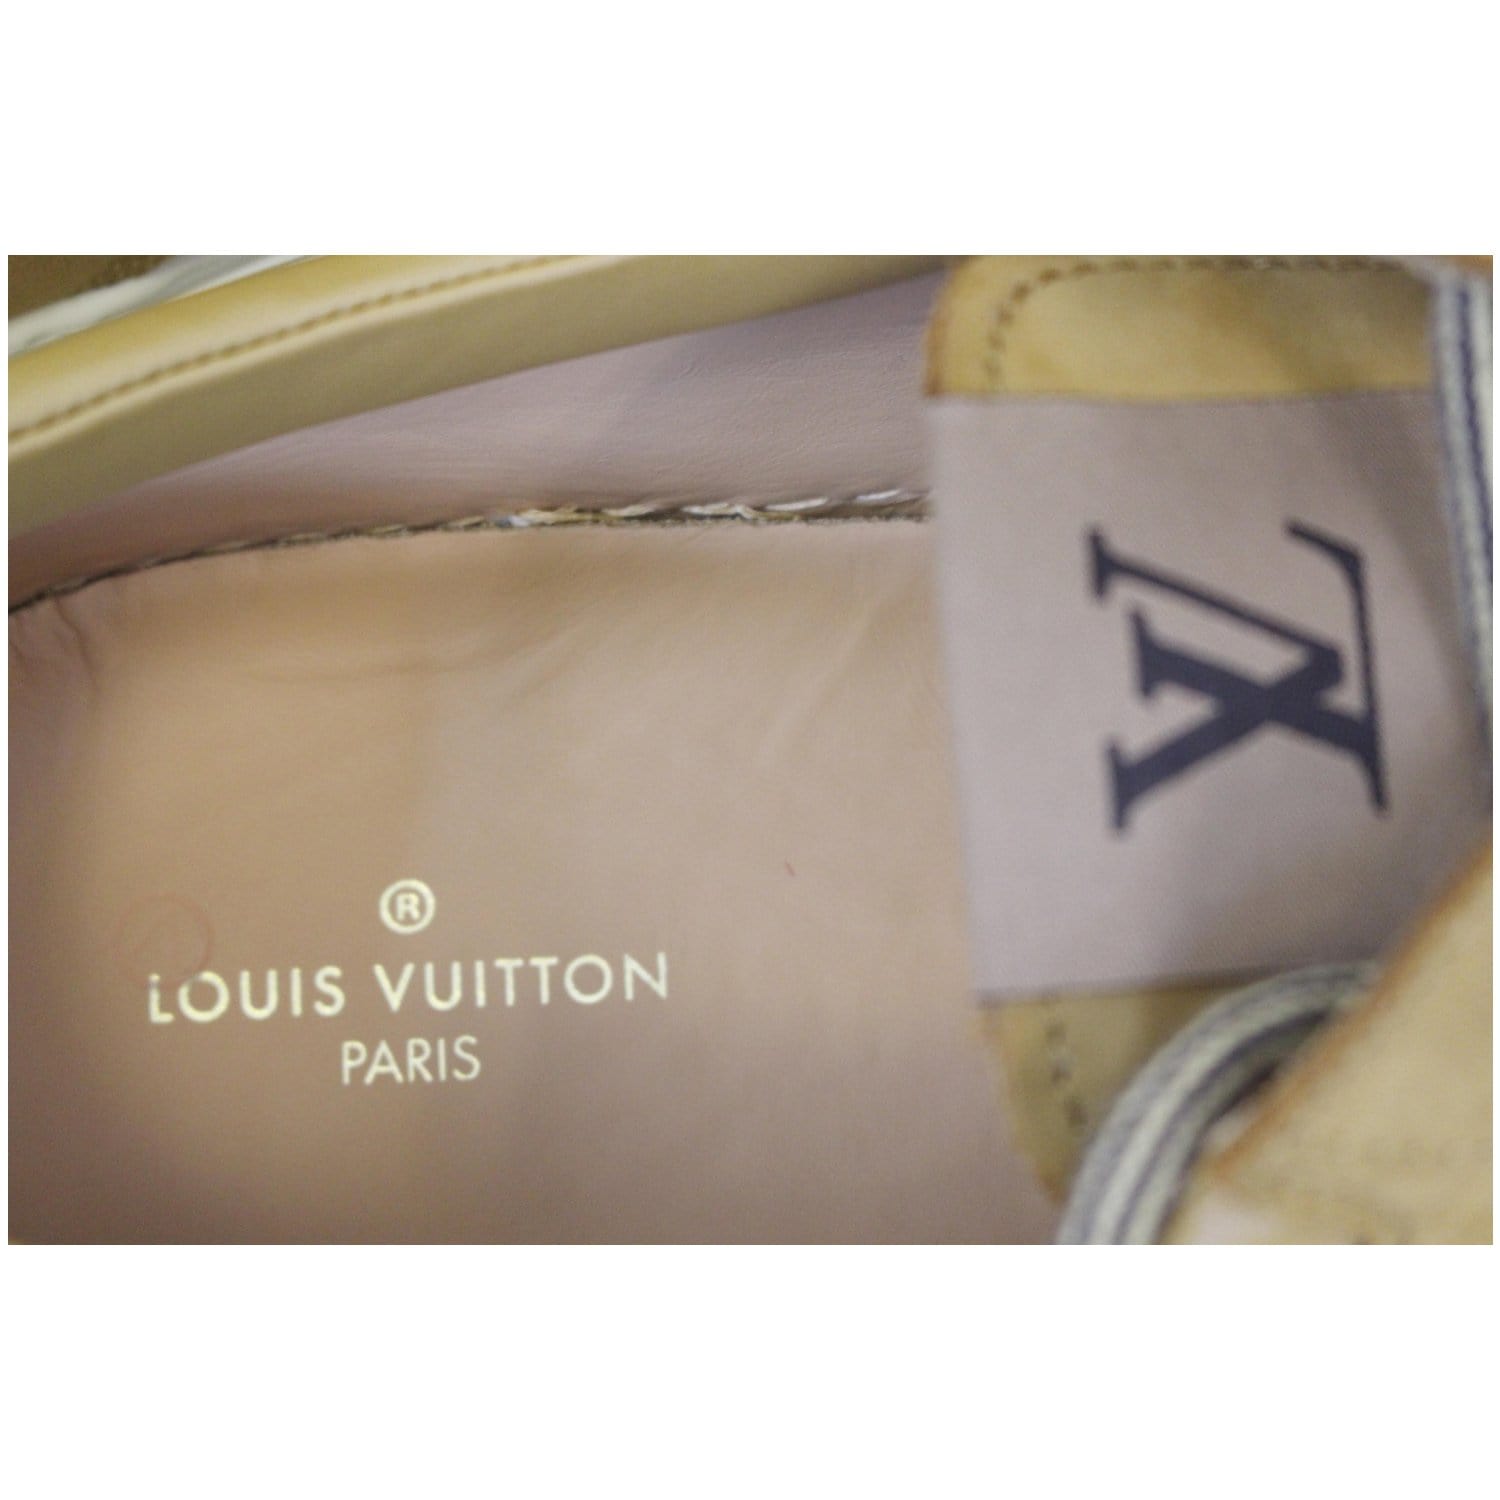 Marineh David AB on Instagram‎: Louis Vuitton 🤎 the ultimate